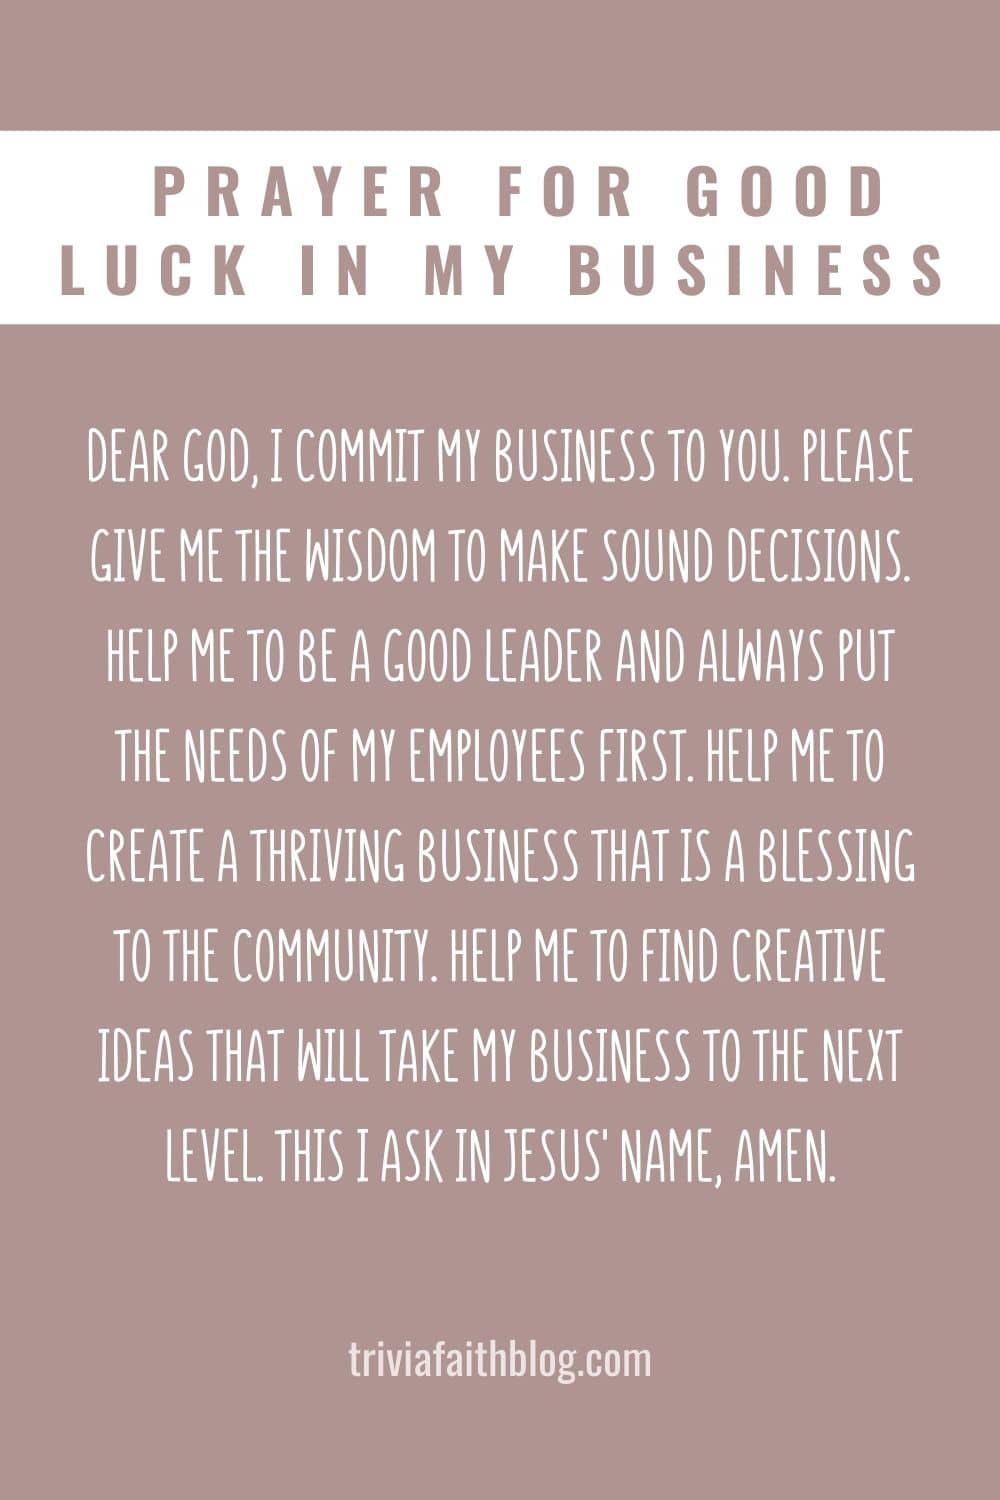 Prayer for Good Luck in My Business